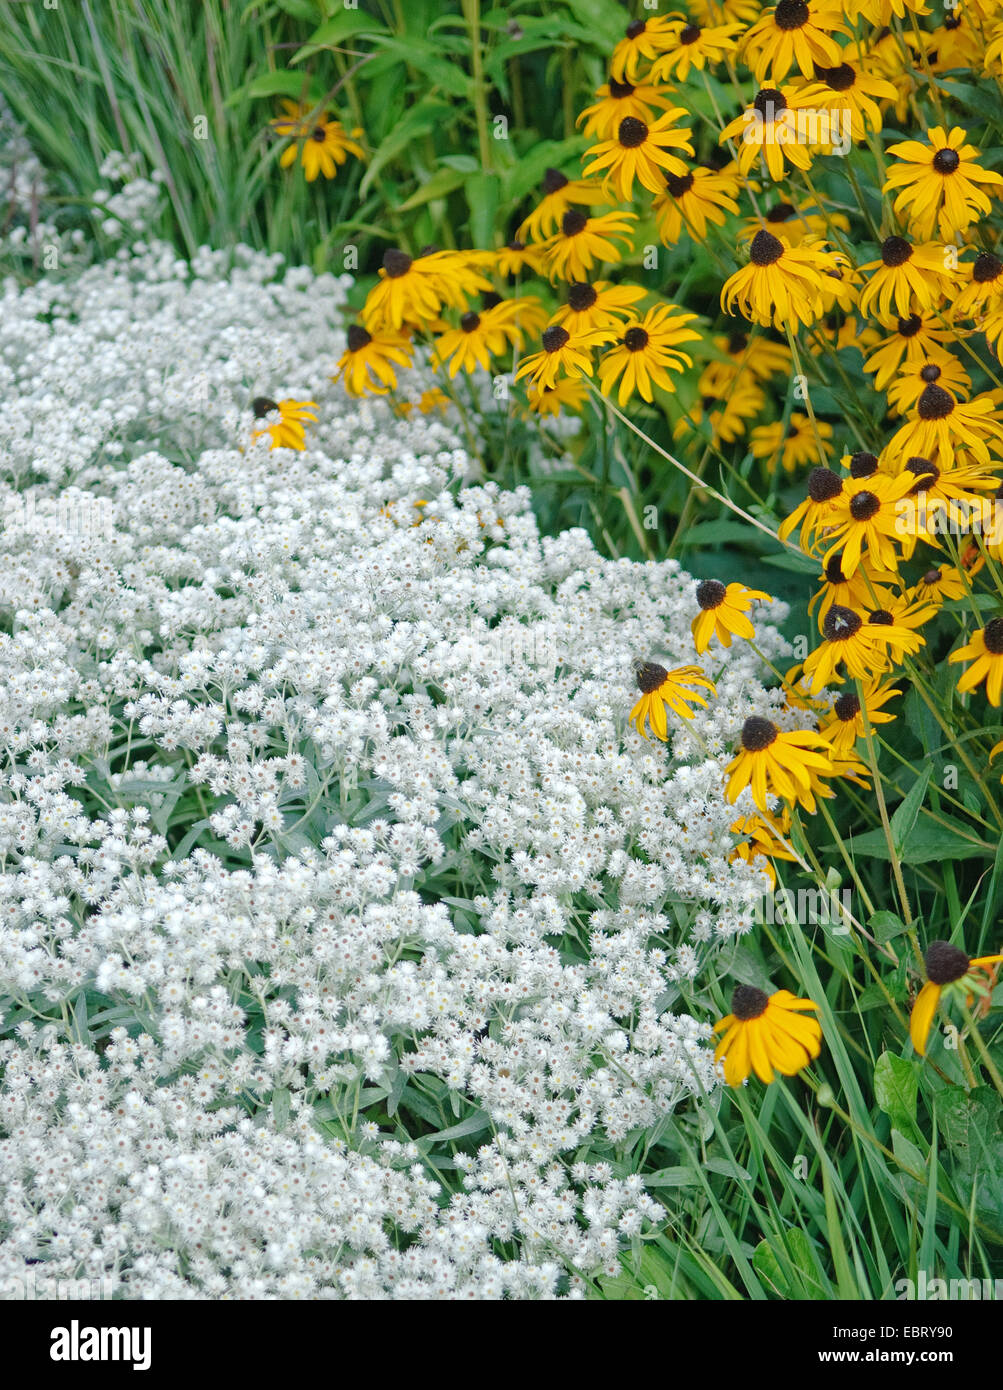 Pearly everlasting (Anaphalis triplinervis 'Sommerschnee', Anaphalis triplinervis Sommerschnee), vultivar Sommerschnee, together with Rudbeckia fulgida 'Goldsturm' Stock Photo